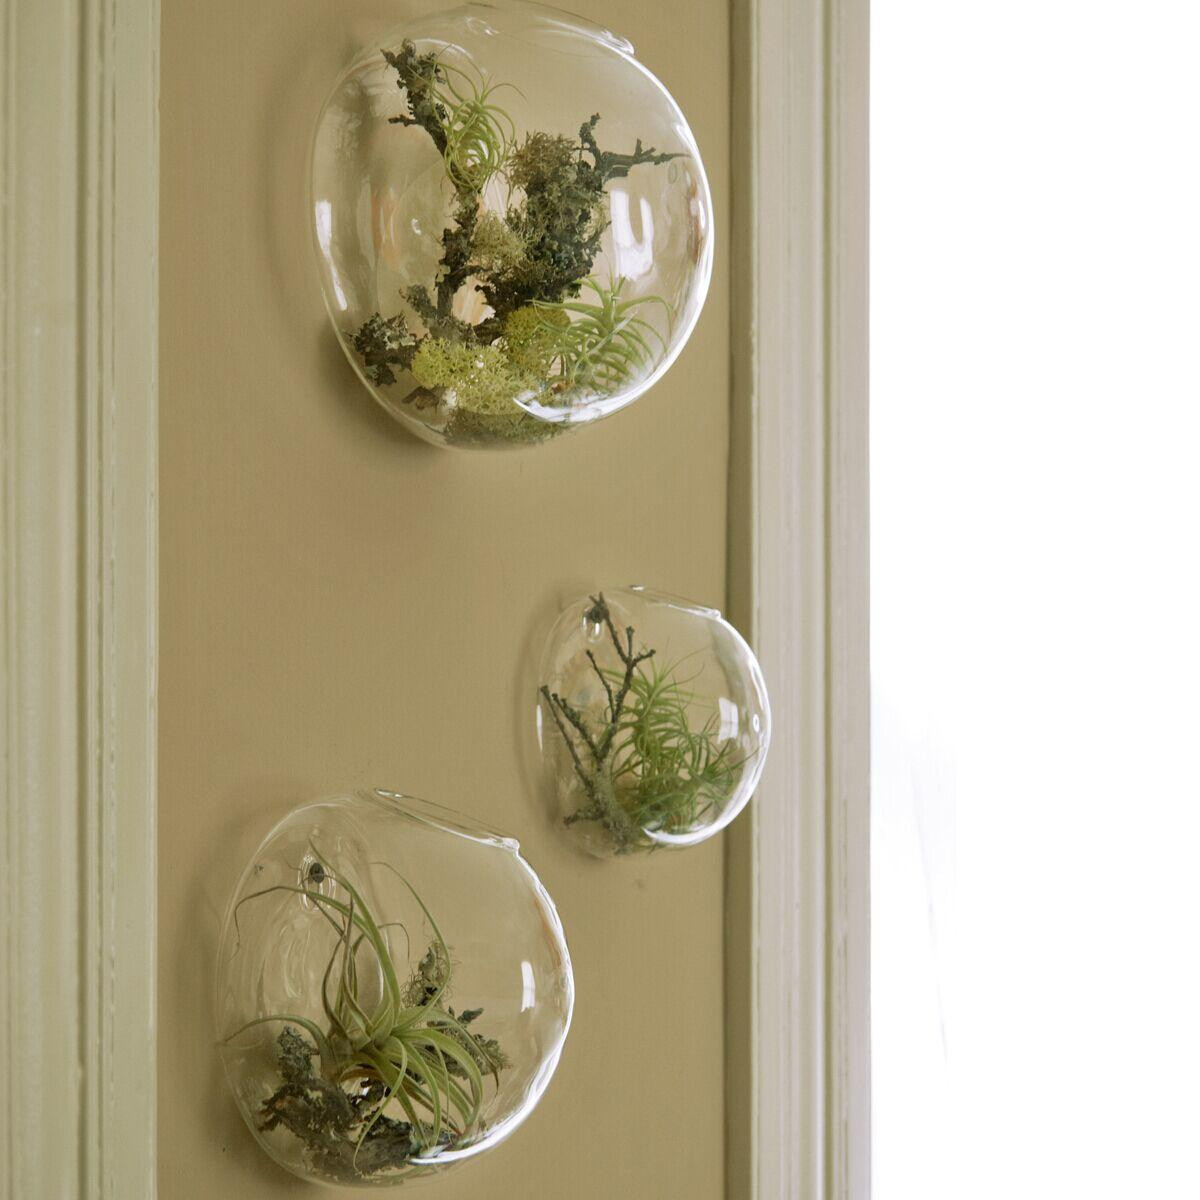 16 Lovely Terrarium Vase wholesale 2023 free download terrarium vase wholesale of wall bubble terrariums glass wall vase for flowers indoor plants with regard to wall bubble terrariums glass wall vase for flowers indoor plants wall mounted plan